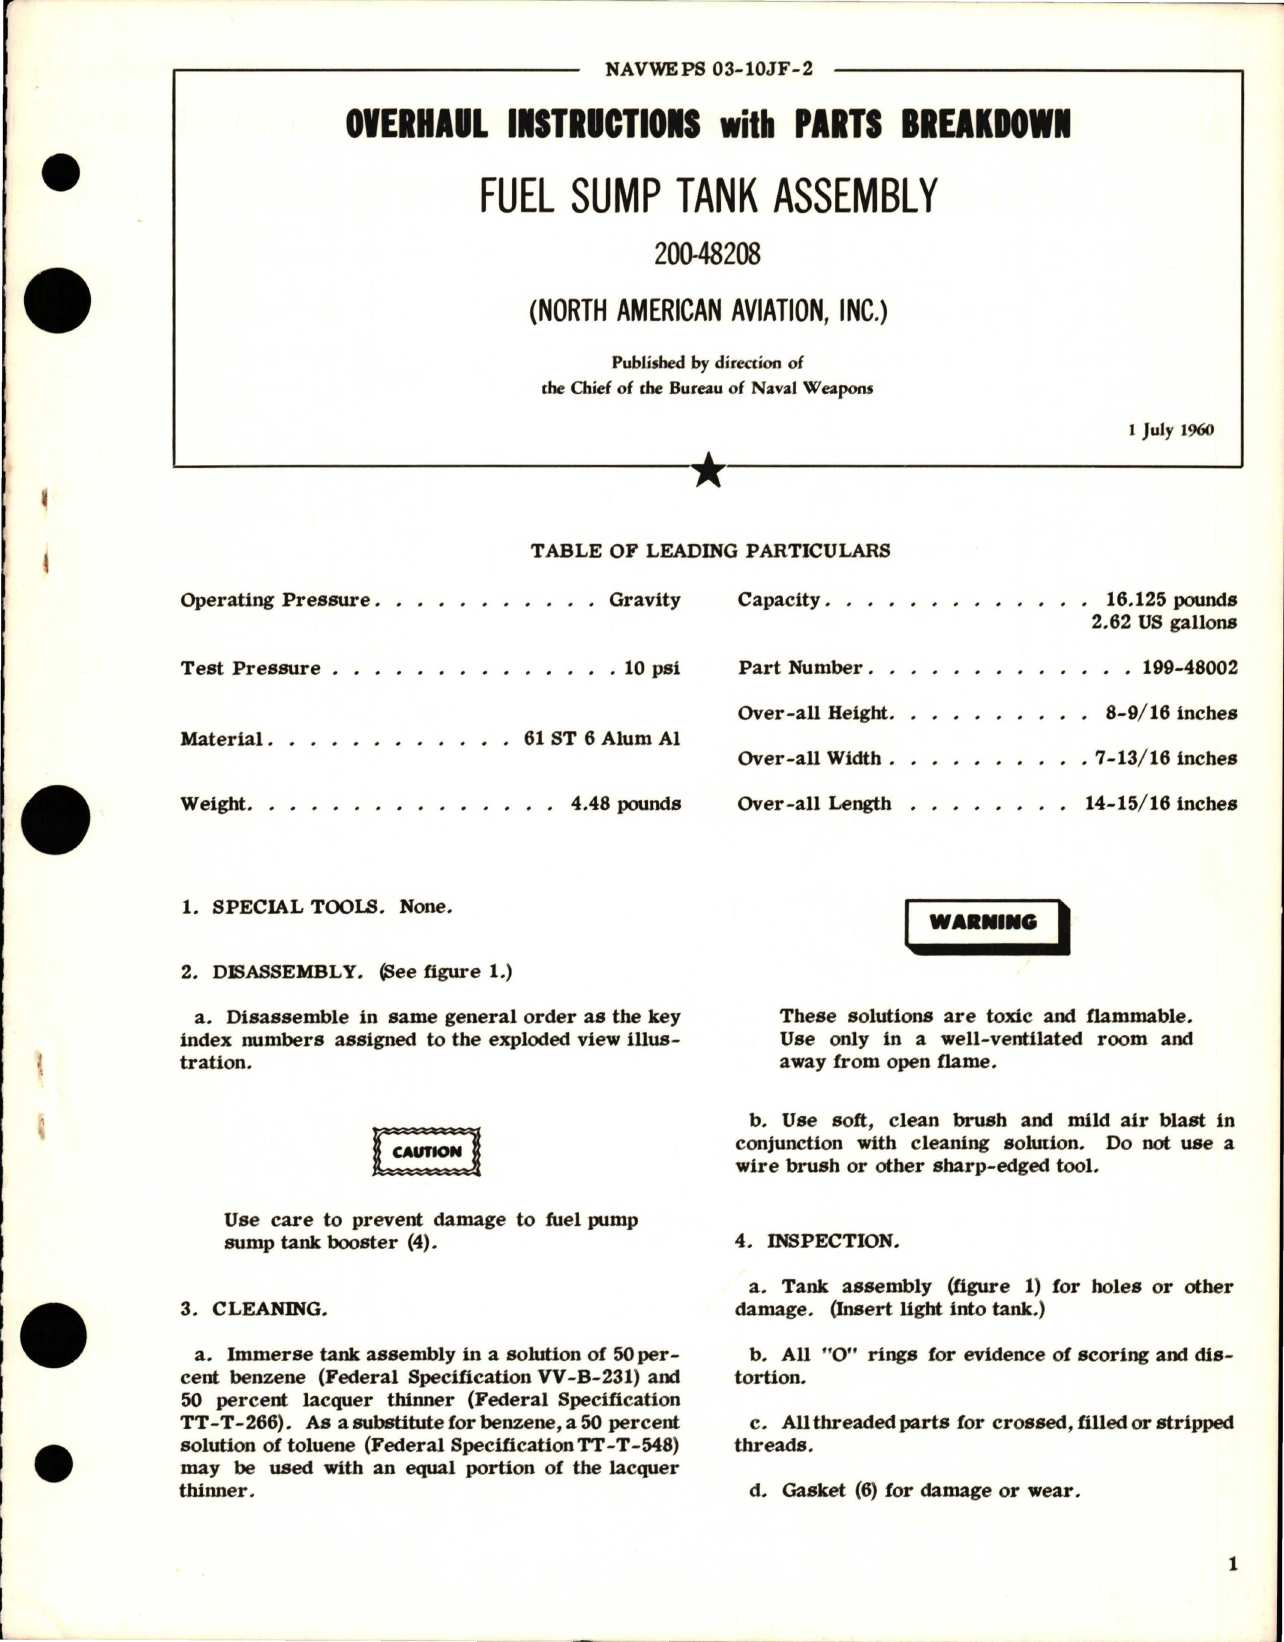 Sample page 1 from AirCorps Library document: Overhaul Instructions with Parts Breakdown for Fuel Sump Tank Assembly - 200-48208 